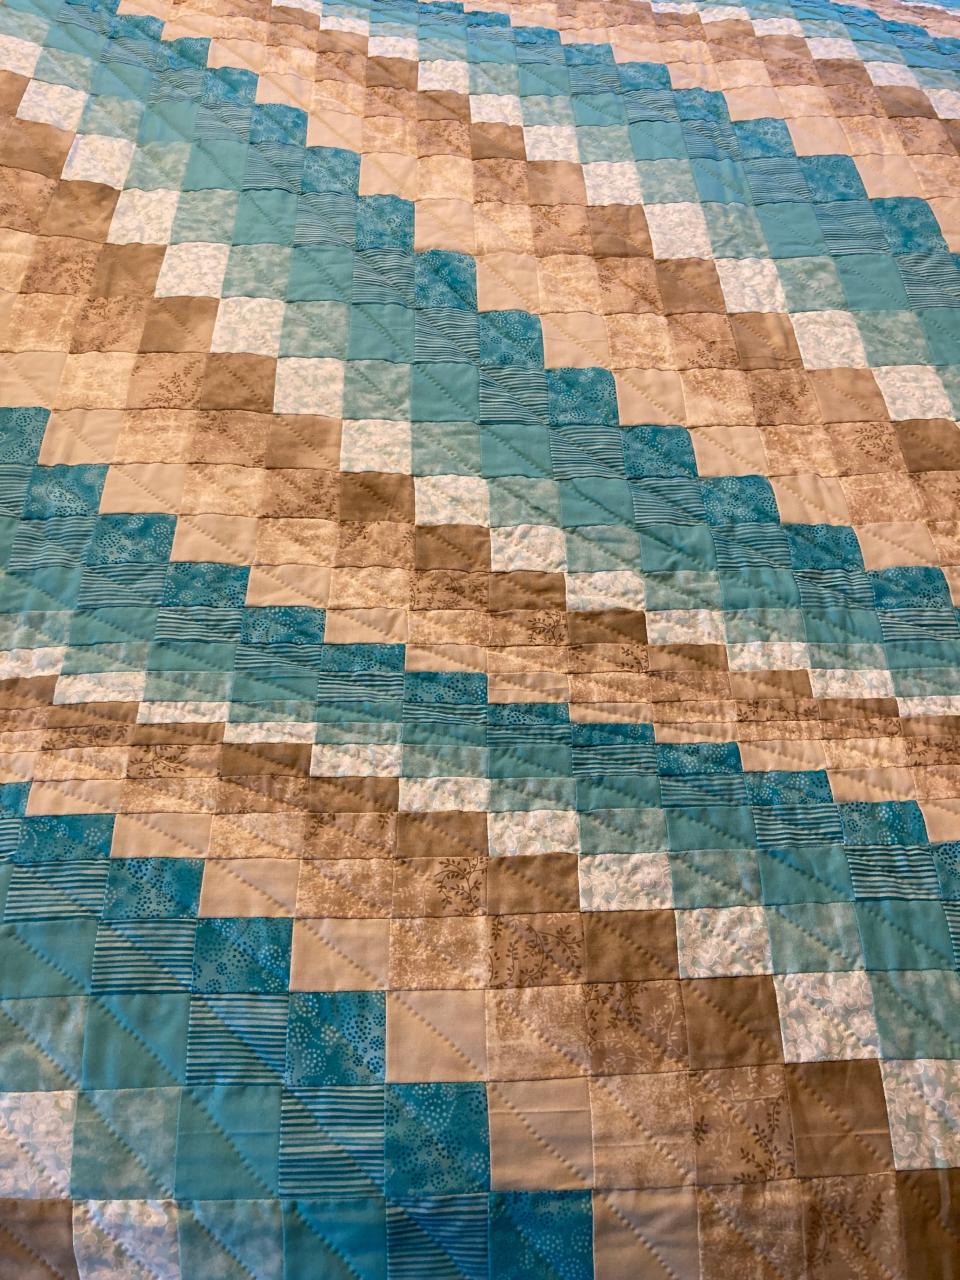 "Surf Song" is one of the featured patterns among the more than 100 quilts in the Art, Craft and Amish Quilt Show taking place July 6 to 9 in Jacksonport.